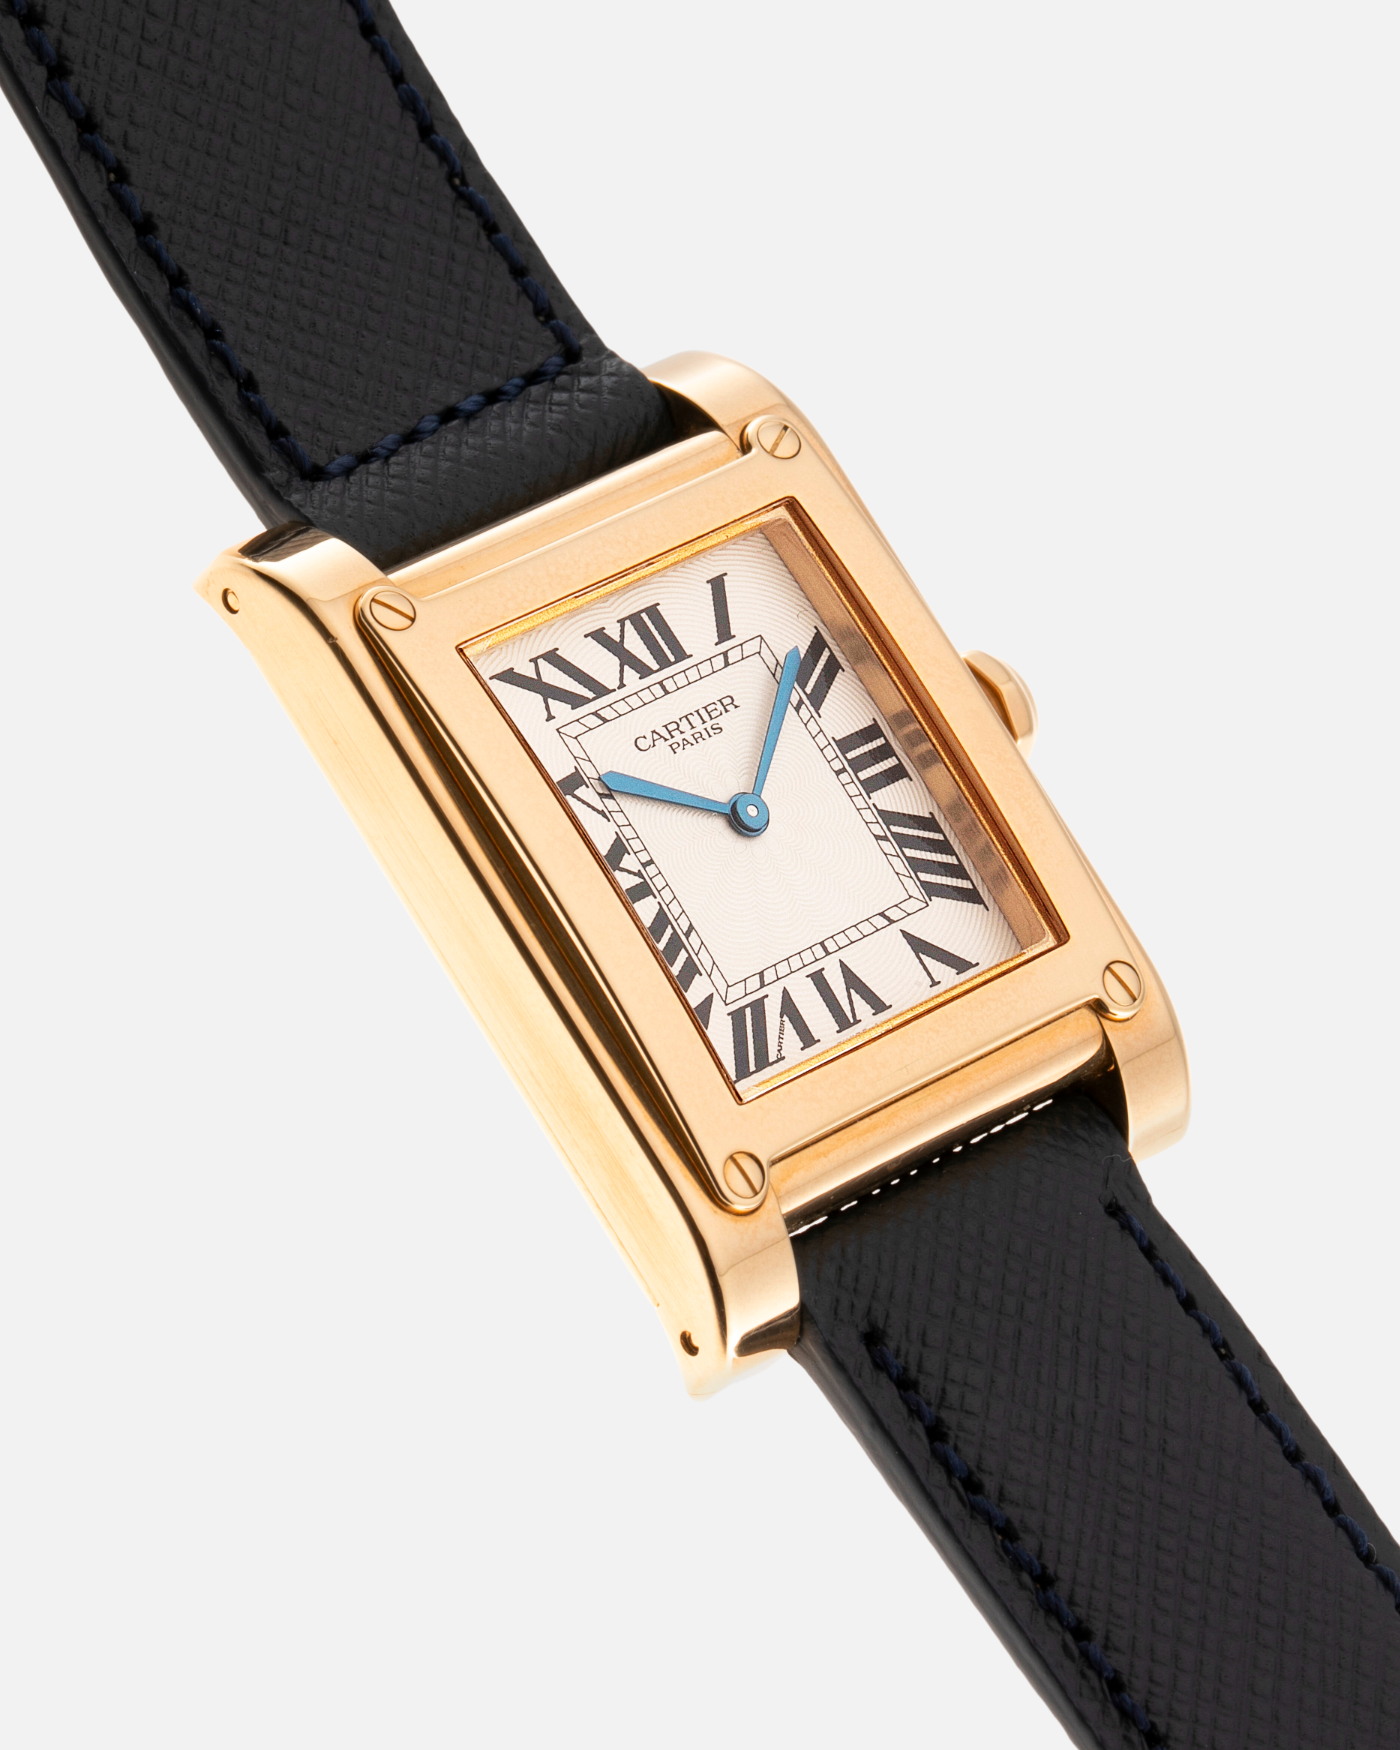 Brand: Cartier Year: 2000’s Model: Tank A Vis Material: 18k Yellow Gold Movement: Cartier 437MC Case Diameter: 26mm X 39mm Strap: Molequin Navy Blue Textured Calf and 18k Yellow Gold Deployant Clasp